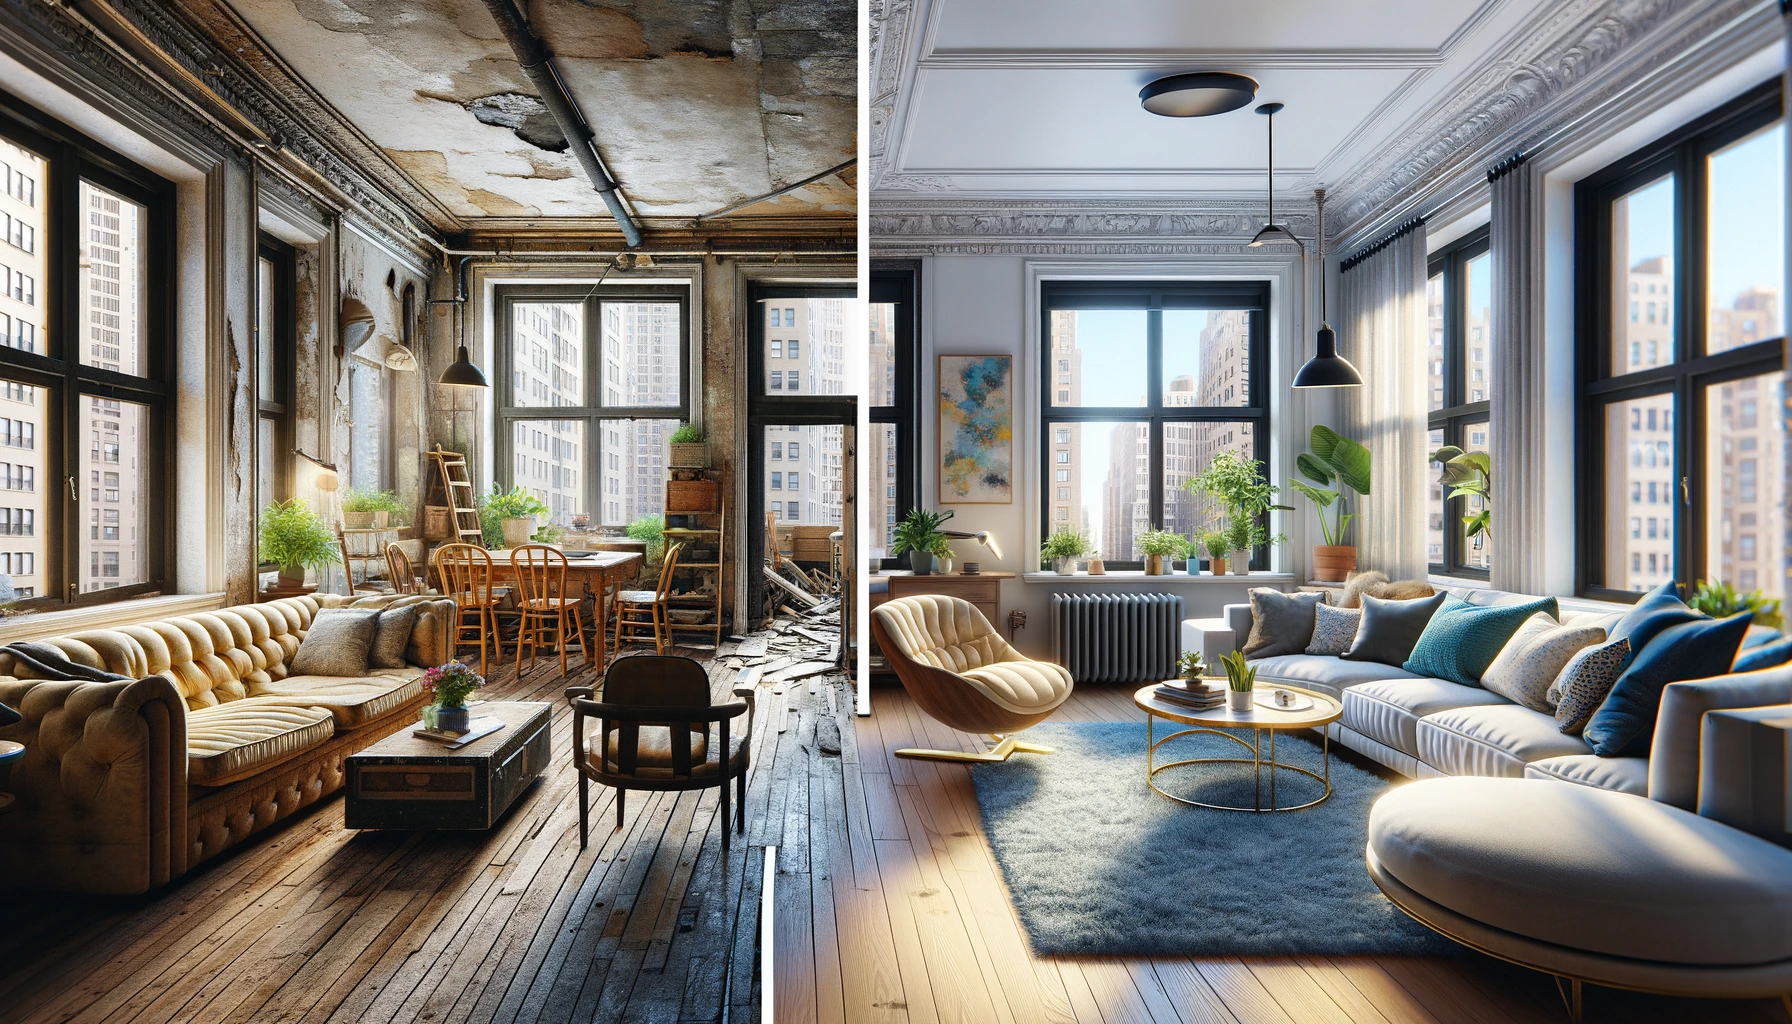 Before and After Photos of a Renovated New York Apartment: "Before and after images showing the transformation of a New York apartment through home renovation in NY, from outdated to modern living space